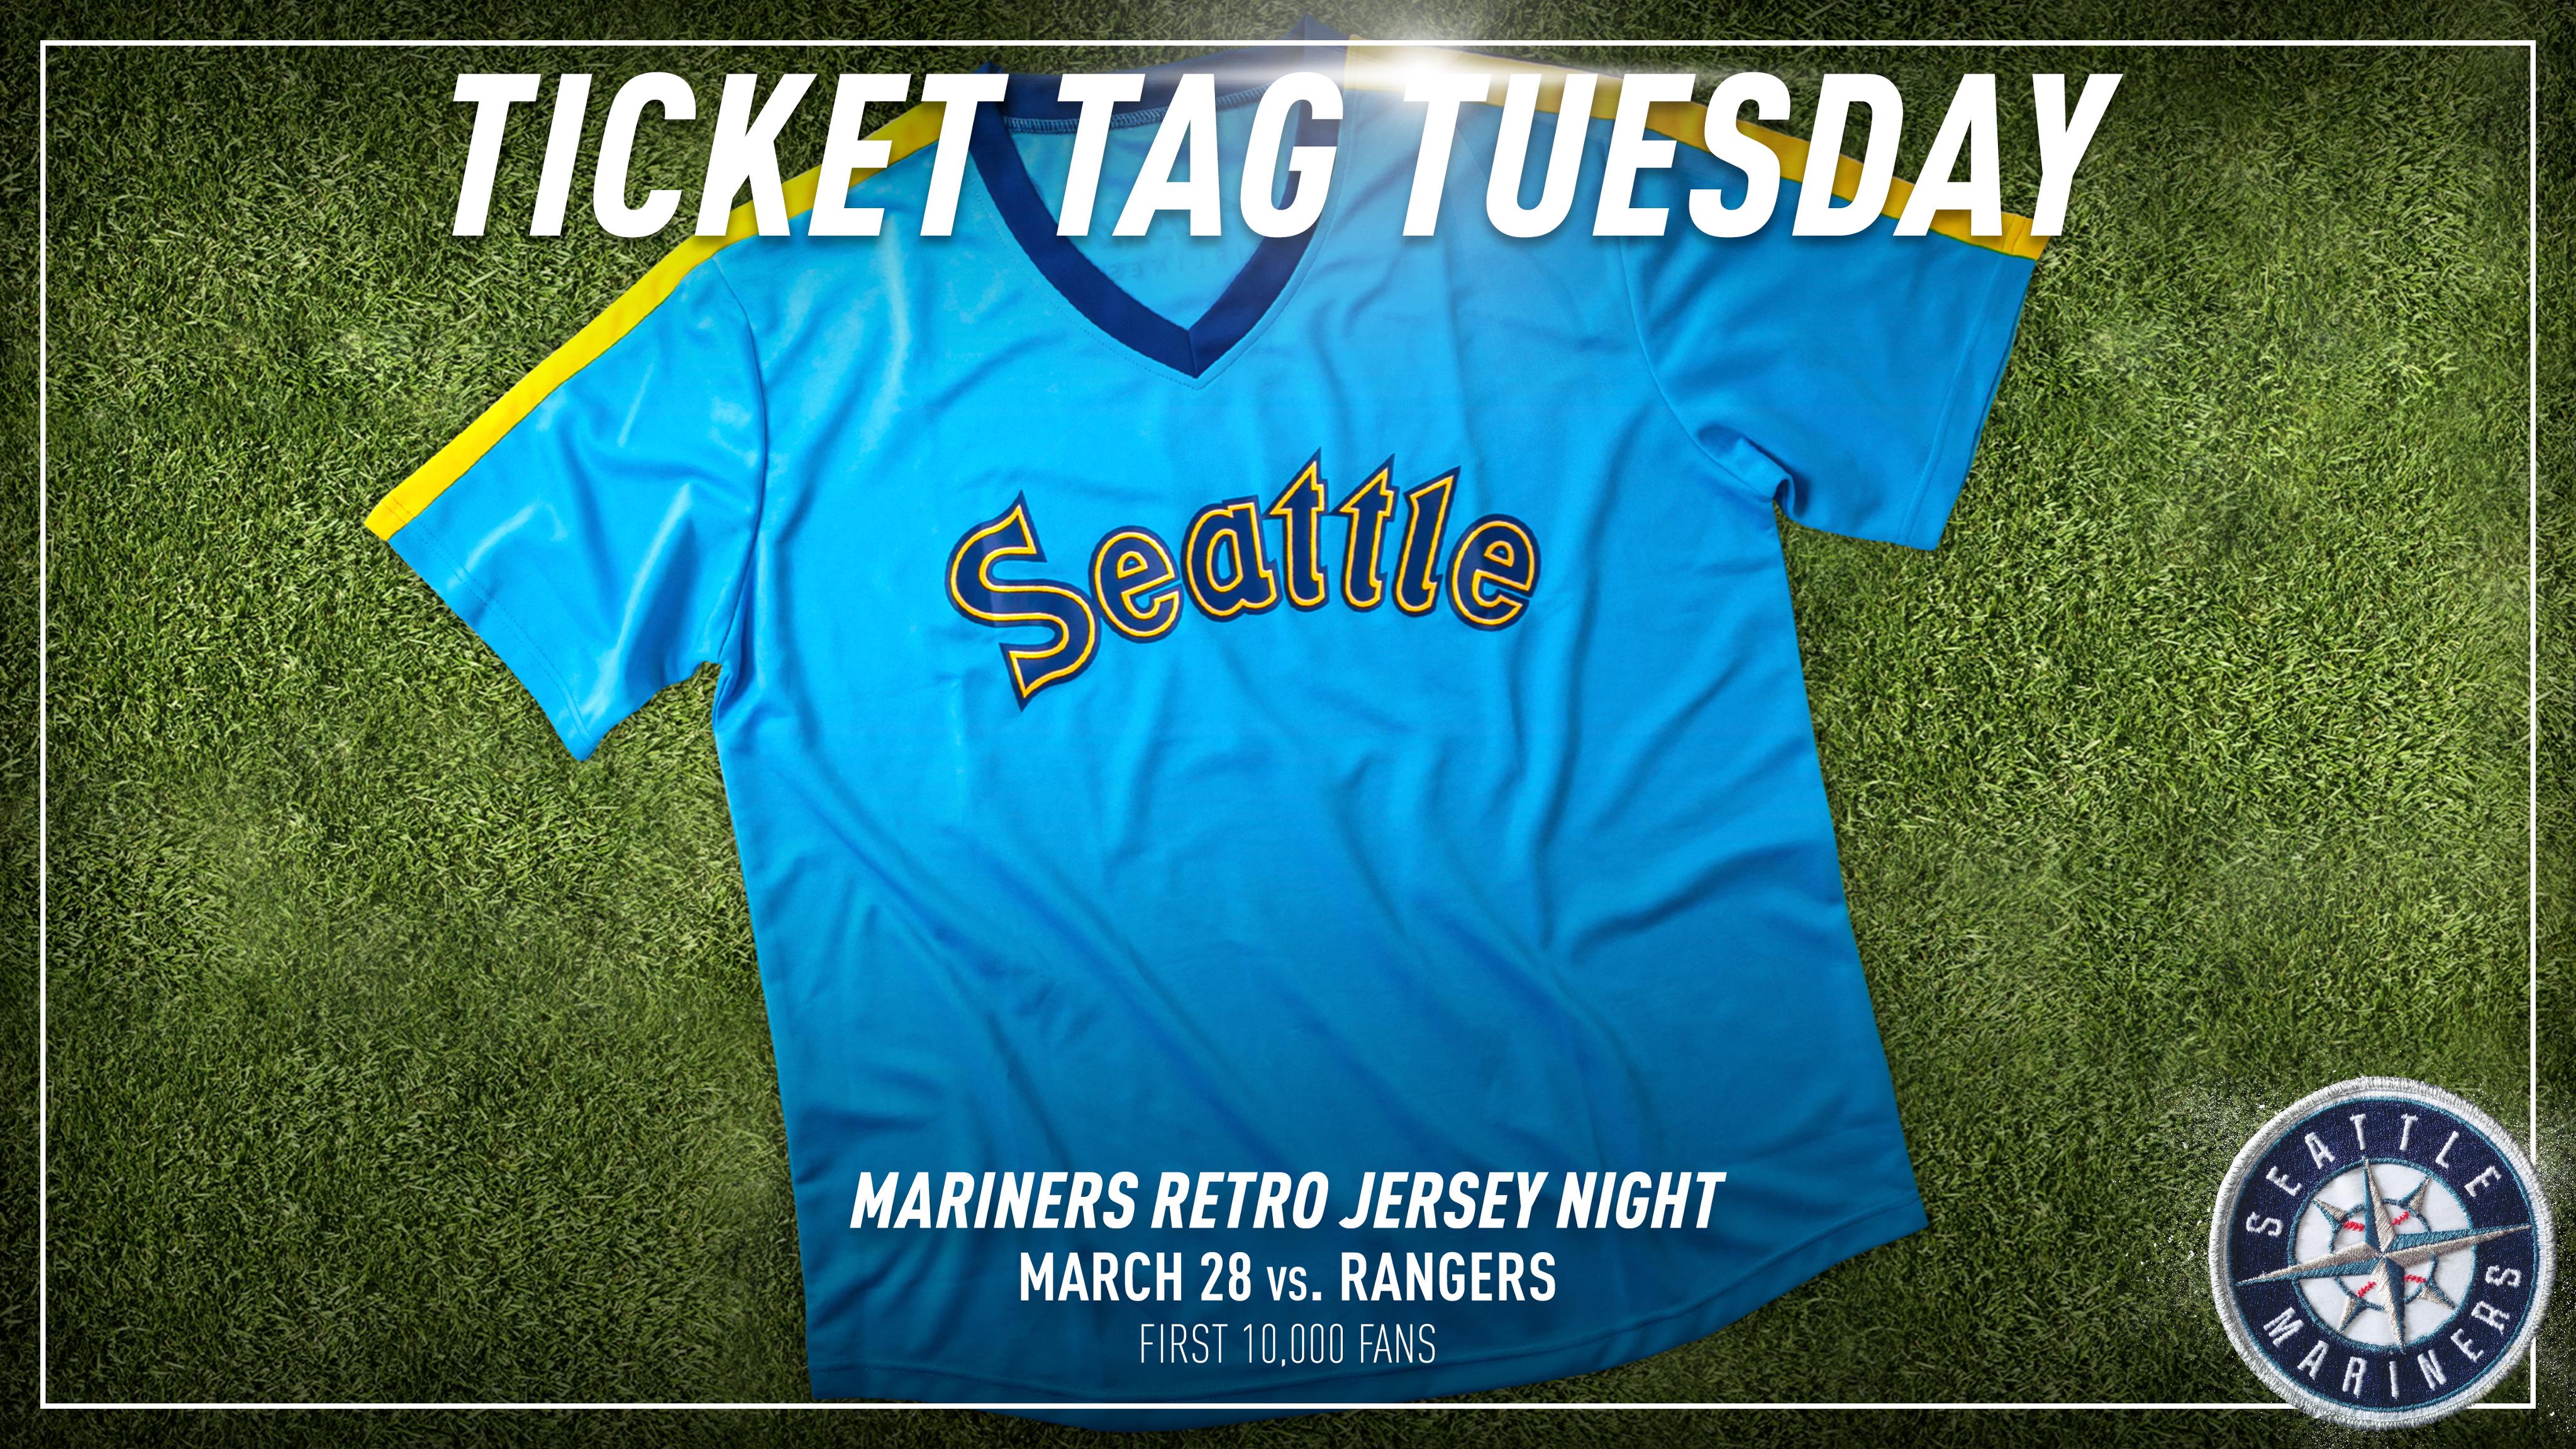 Seattle Mariners on X: 🗣️ IT'S TICKET TAG TUESDAY! We're giving away four  🎟️ to Mariners Retro Jersey Night on March 28! Head on over to our  Instagram page and tag three